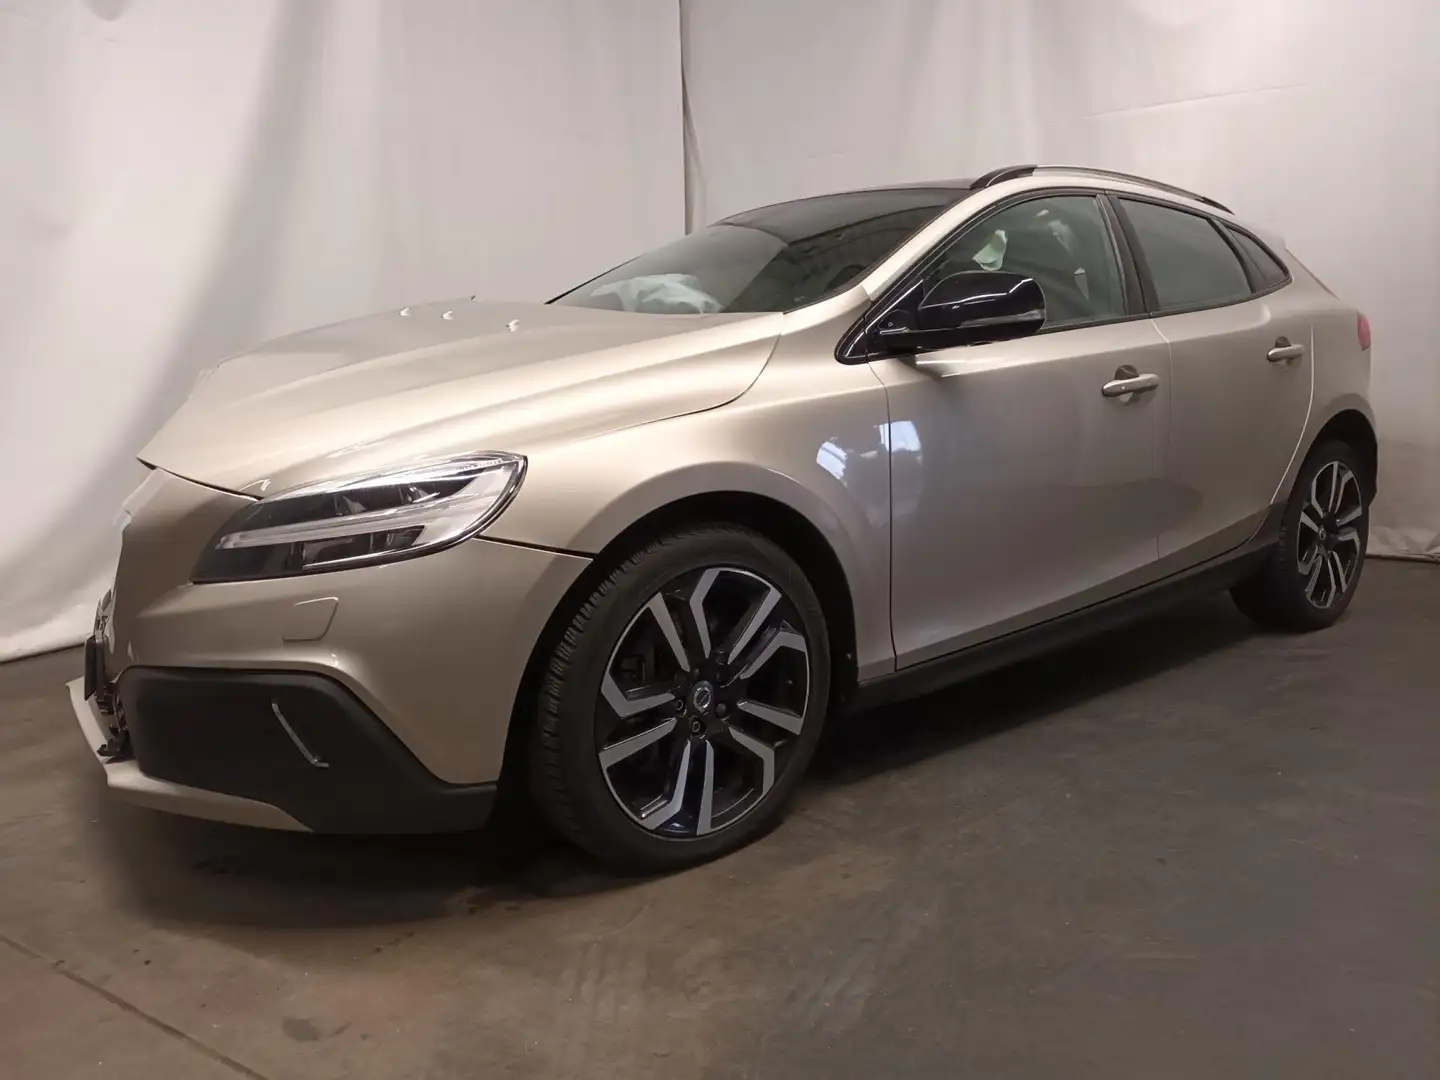 Volvo V40 Cross Country 1.5 T3 Nordic+ - Front Schade - Airbags Defect Bruin - 2